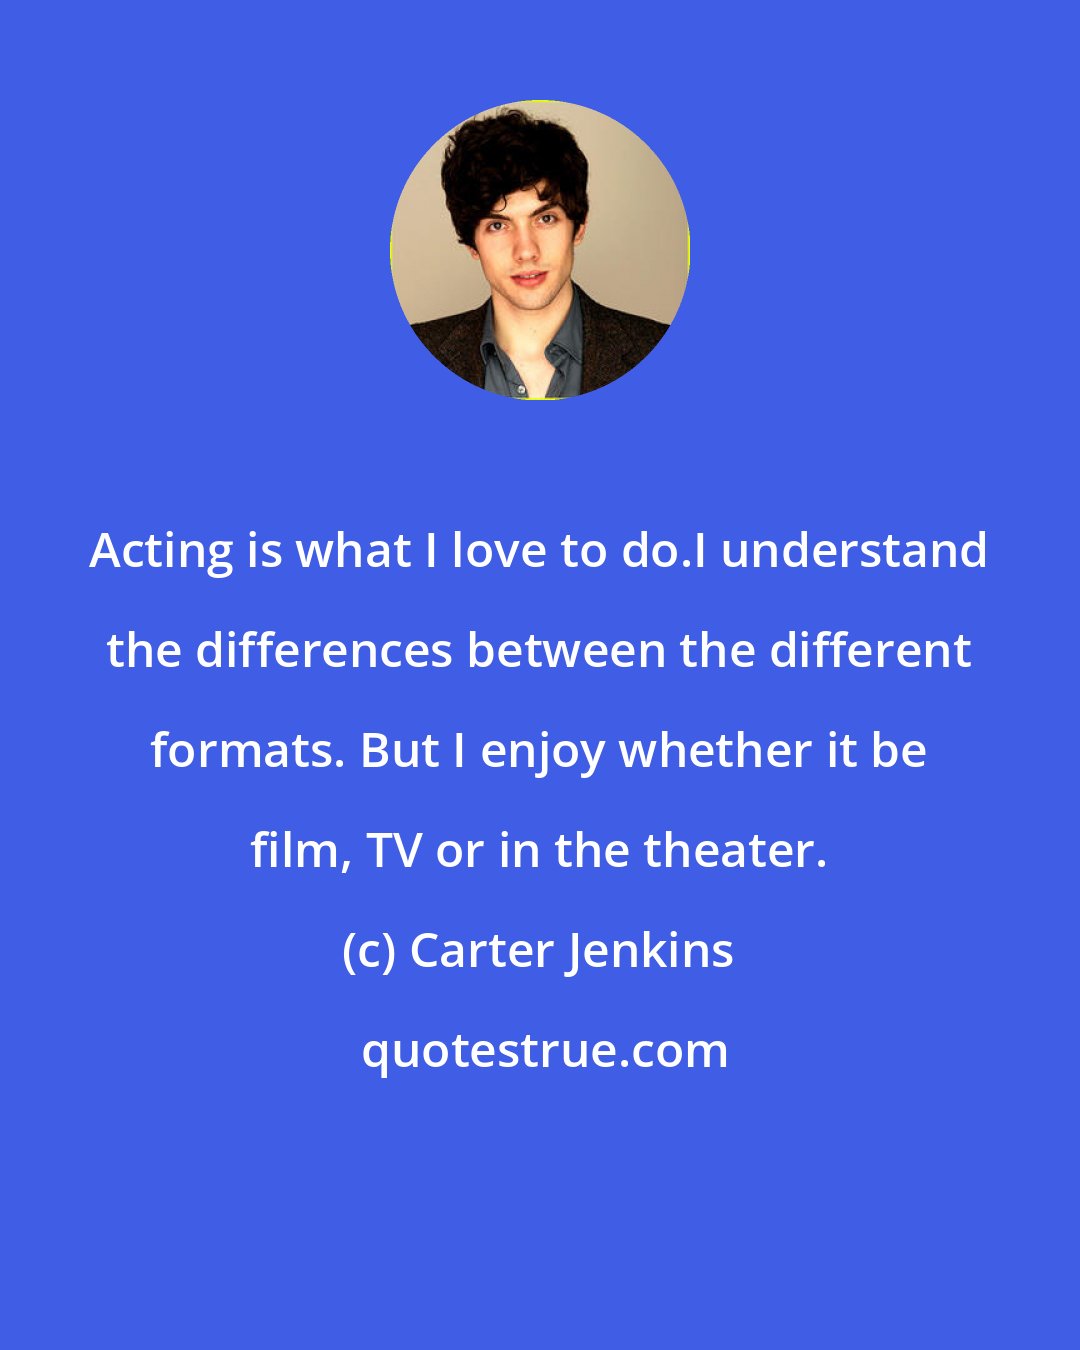 Carter Jenkins: Acting is what I love to do.I understand the differences between the different formats. But I enjoy whether it be film, TV or in the theater.